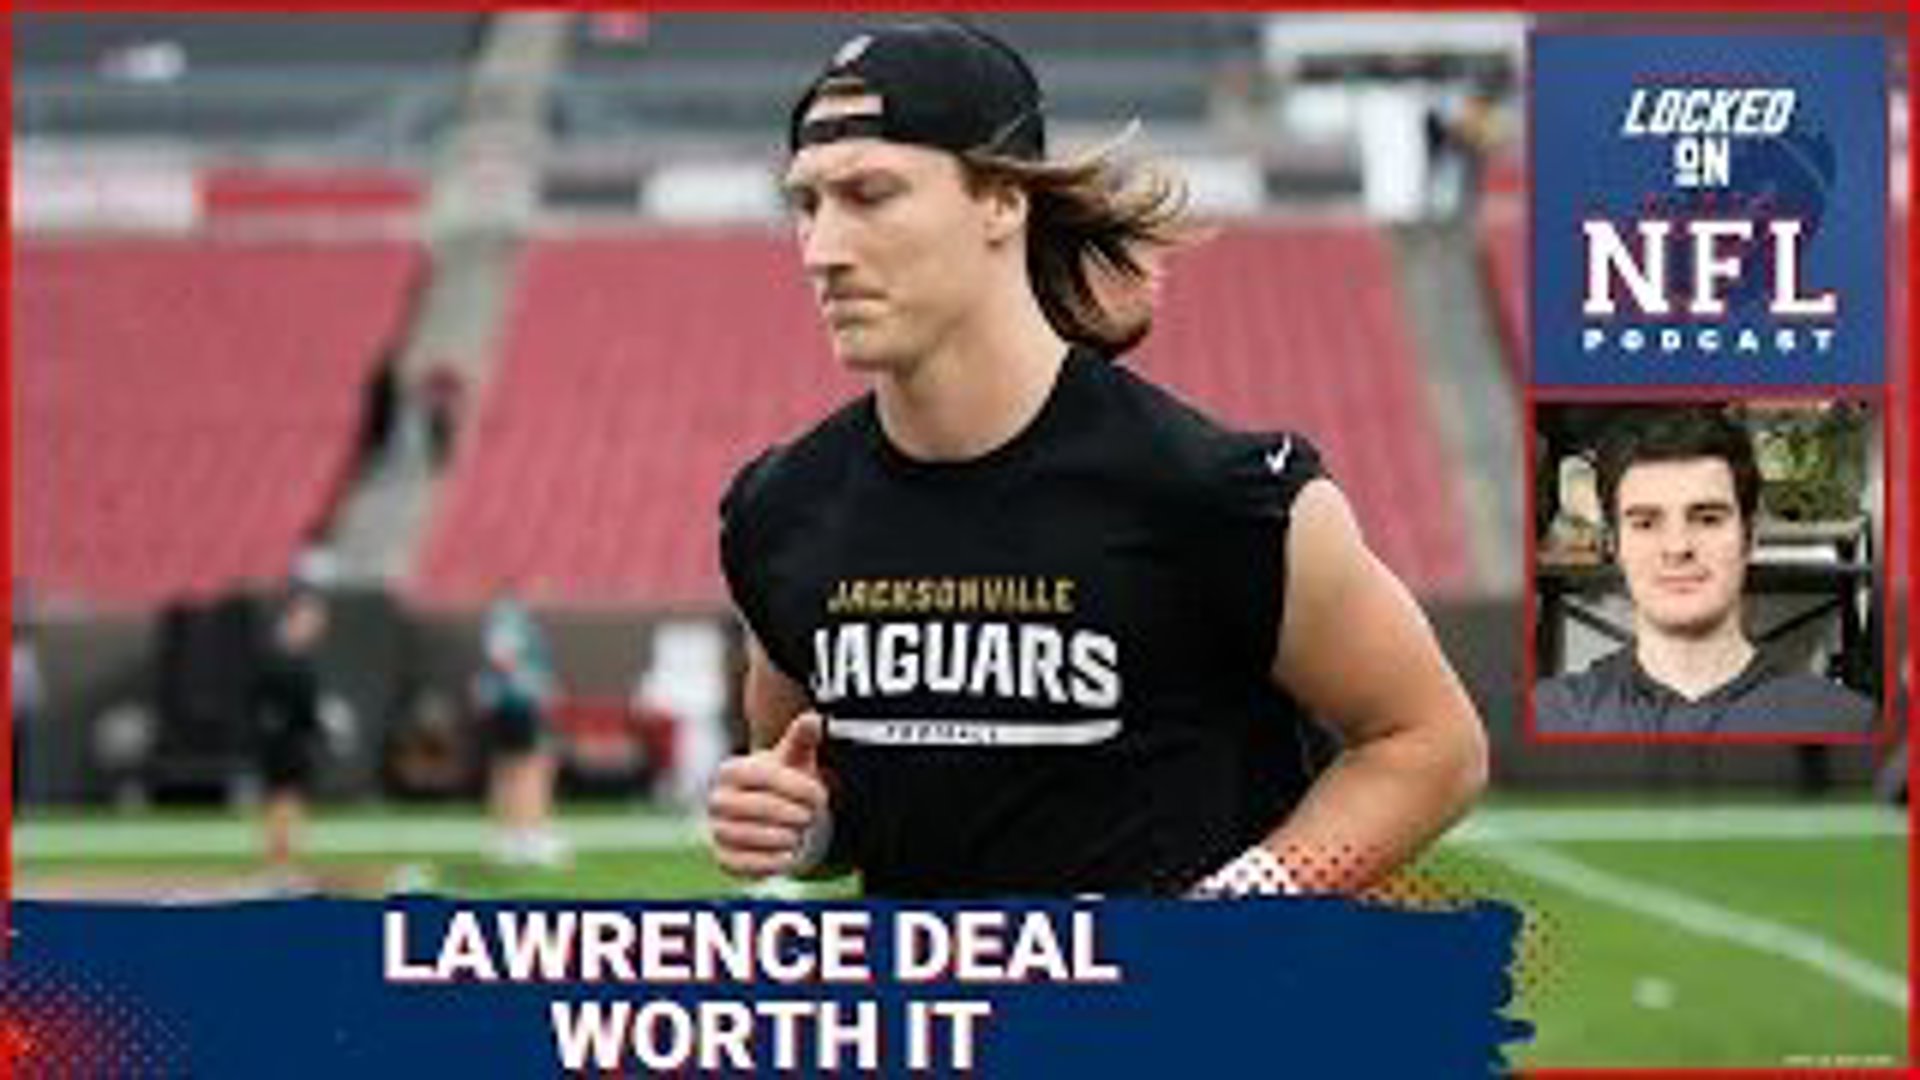 We look at why giving Trevor Lawrence a massive extension was the right decision for the Jacksonville Jaguars, Mike Tomlin's extension with the Pittsburgh Steelers.